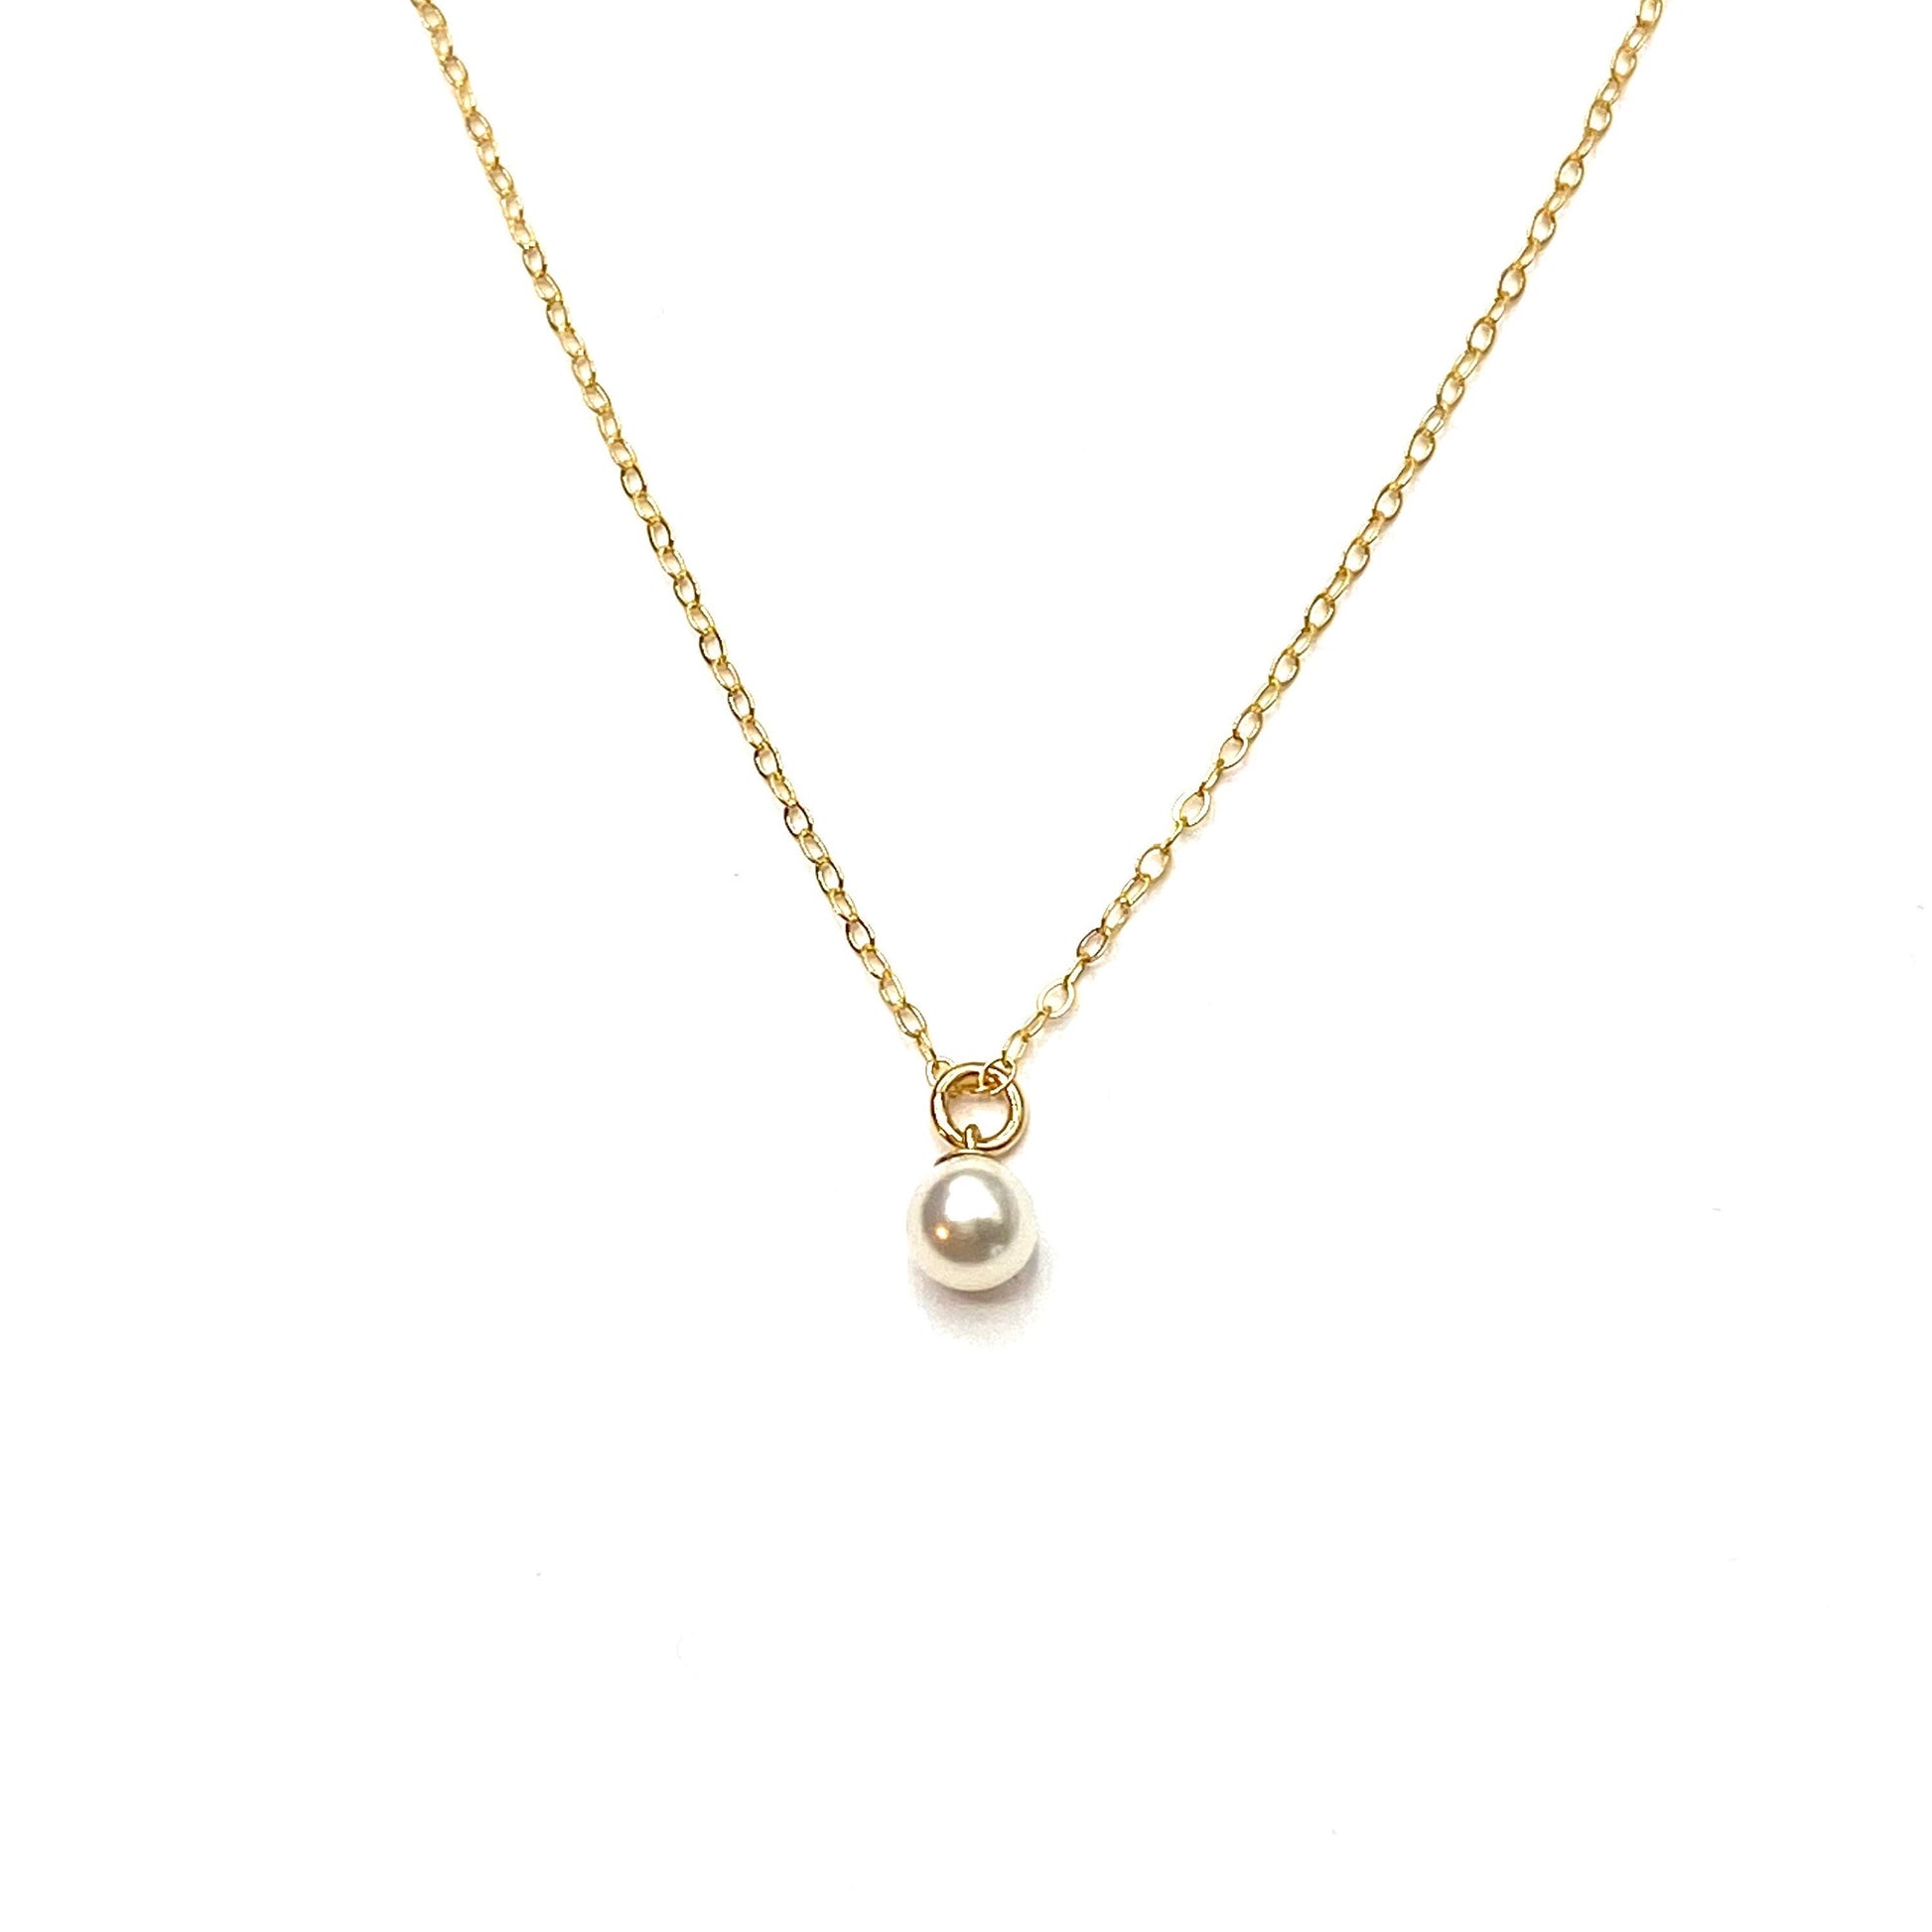 pearl stacking necklace ireland gold pearl necklace dainty pearl necklace